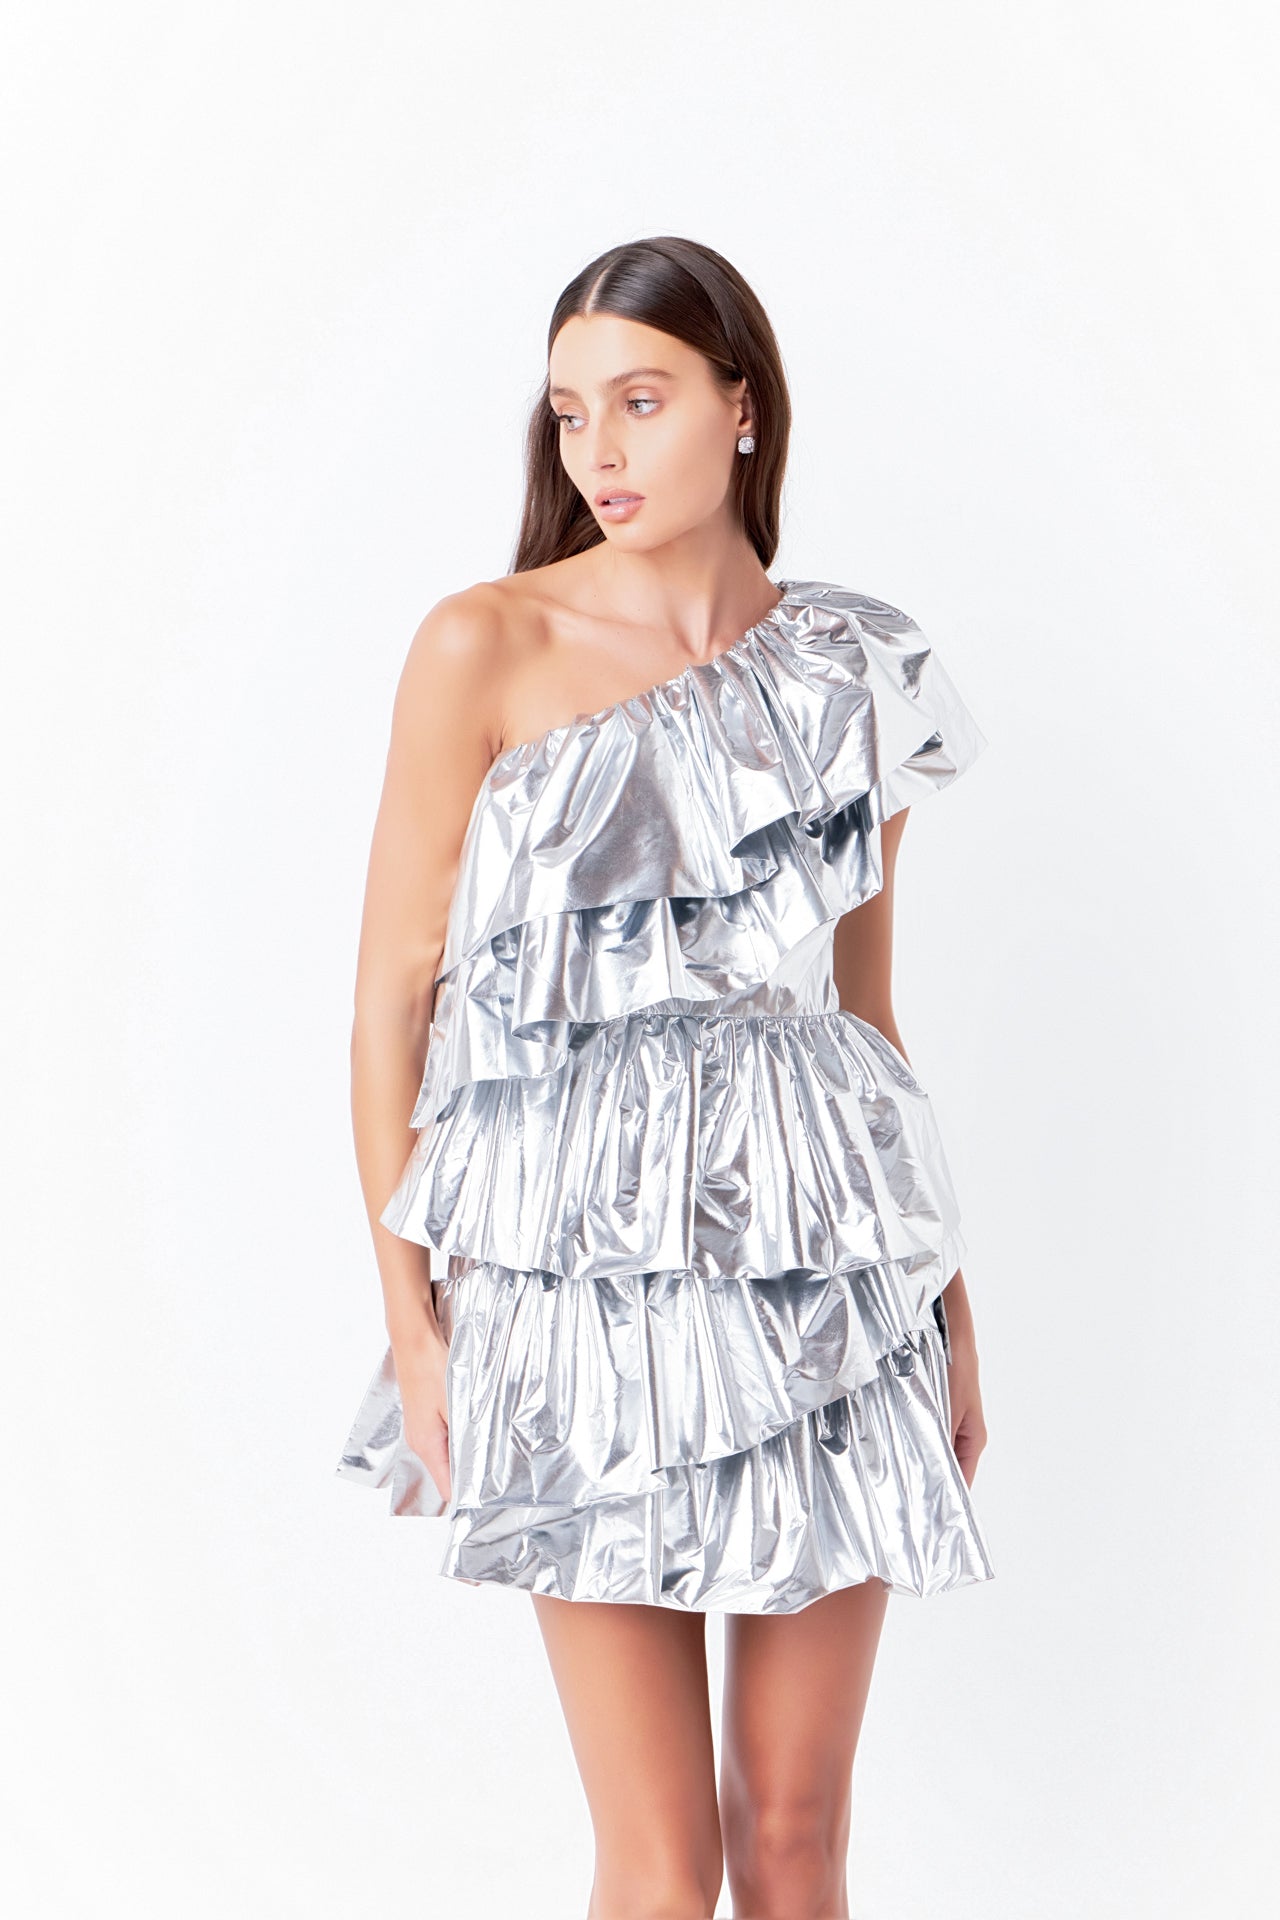 ENDLESS ROSE - Metallic Tiered Mini Dress - DRESSES available at Objectrare